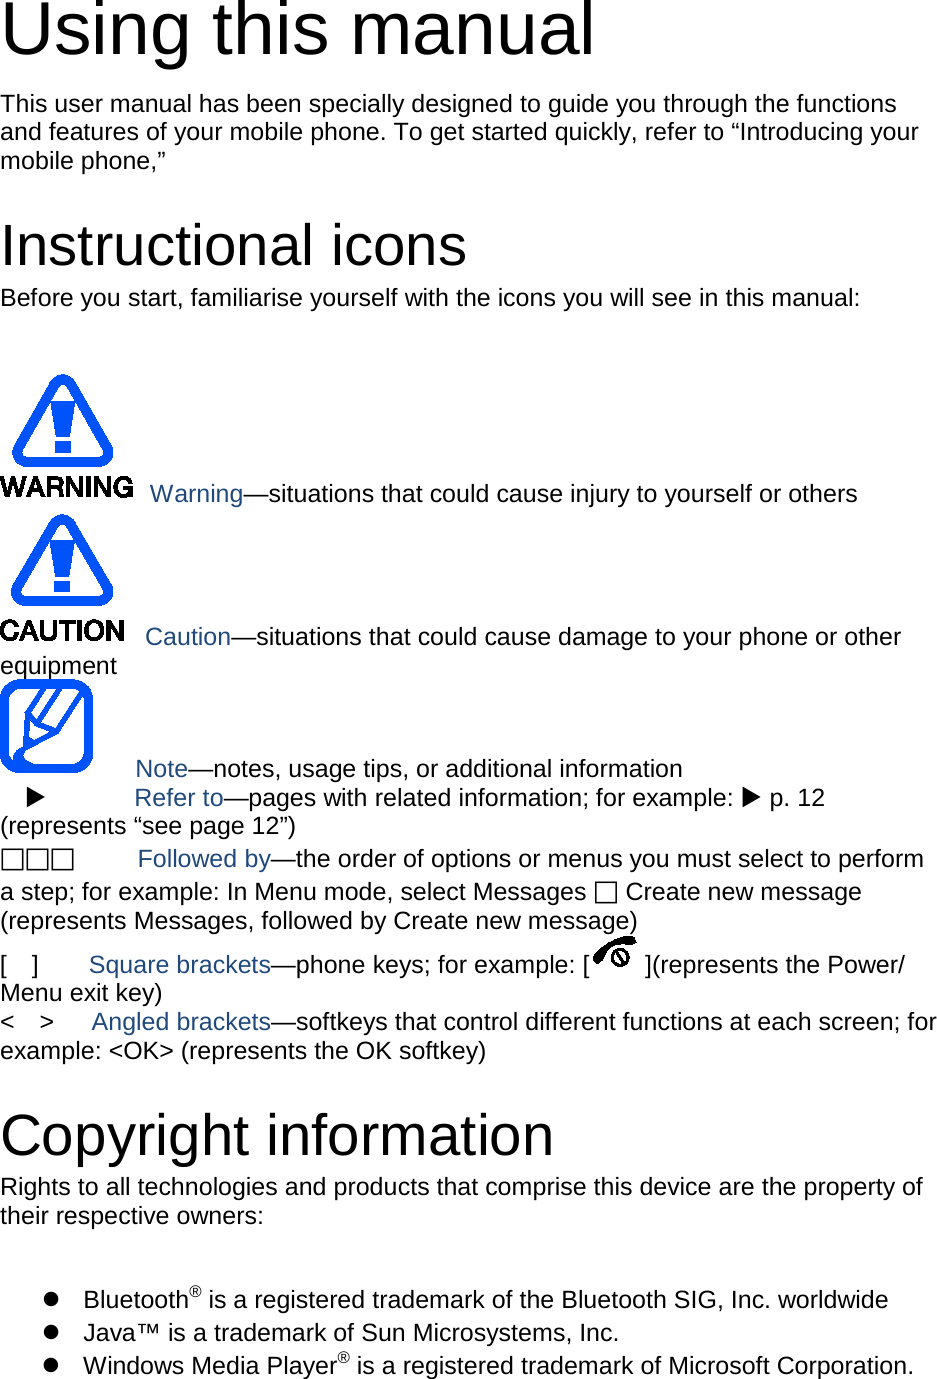 Using this manual This user manual has been specially designed to guide you through the functions and features of your mobile phone. To get started quickly, refer to “Introducing your mobile phone,”  Instructional icons Before you start, familiarise yourself with the icons you will see in this manual:     Warning—situations that could cause injury to yourself or others  Caution—situations that could cause damage to your phone or other equipment    Note—notes, usage tips, or additional information          Refer to—pages with related information; for example:  p. 12 (represents “see page 12”)      Followed by—the order of options or menus you must select to perform a step; for example: In Menu mode, select Messages  Create new message (represents Messages, followed by Create new message) [  ]    Square brackets—phone keys; for example: [ ](represents the Power/ Menu exit key) &lt;  &gt;   Angled brackets—softkeys that control different functions at each screen; for example: &lt;OK&gt; (represents the OK softkey)  Copyright information Rights to all technologies and products that comprise this device are the property of their respective owners:   Bluetooth® is a registered trademark of the Bluetooth SIG, Inc. worldwide  Java™ is a trademark of Sun Microsystems, Inc.  Windows Media Player® is a registered trademark of Microsoft Corporation. 